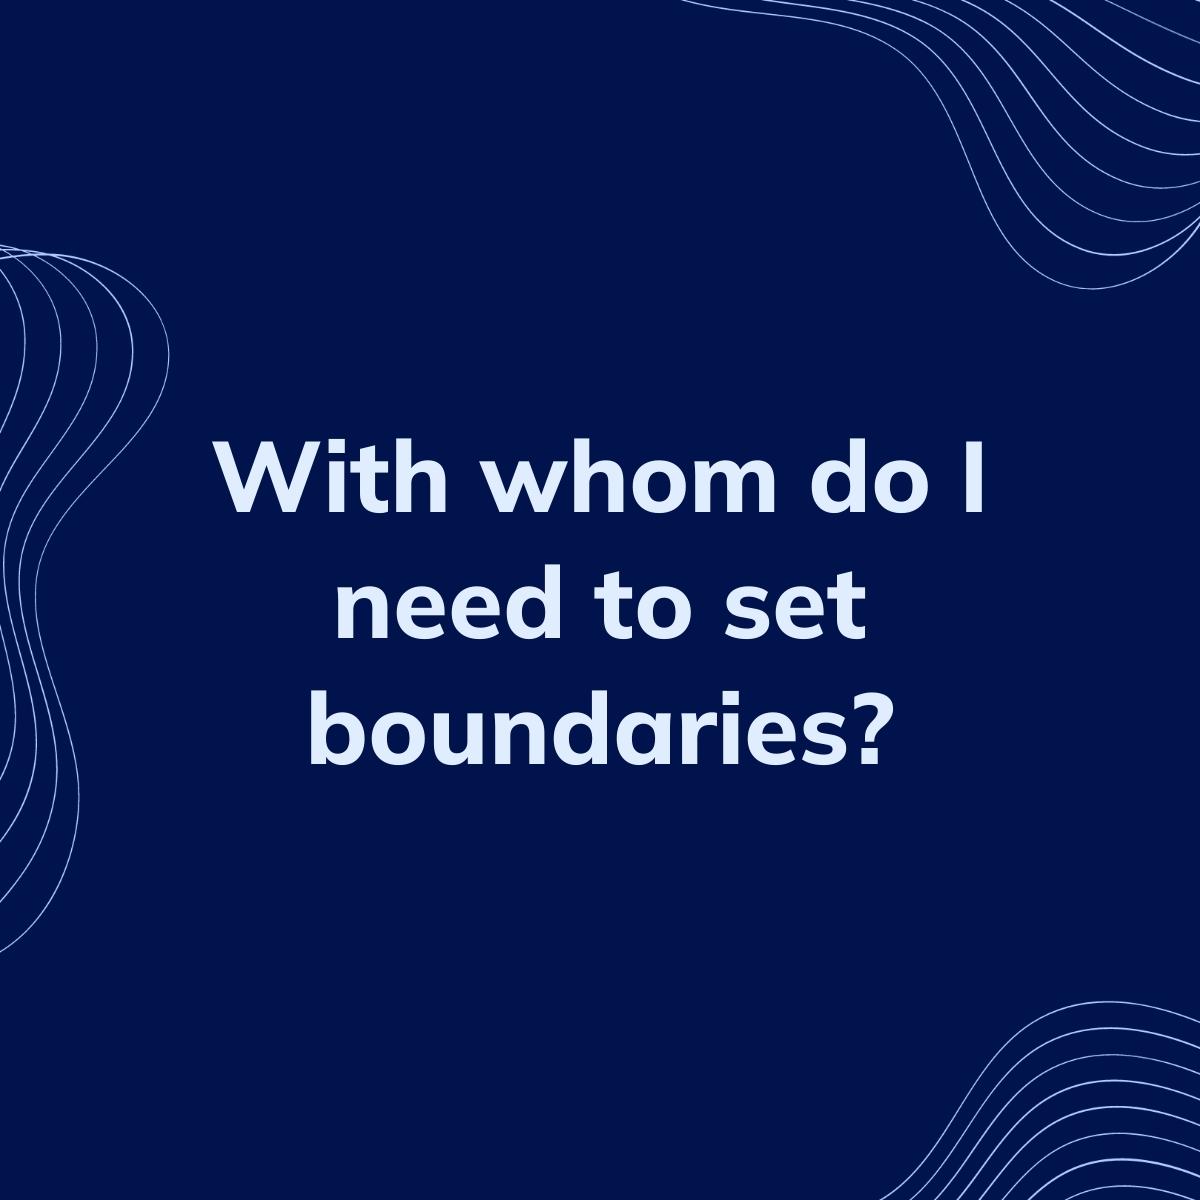 Journal Prompt: With whom do I need to set boundaries?